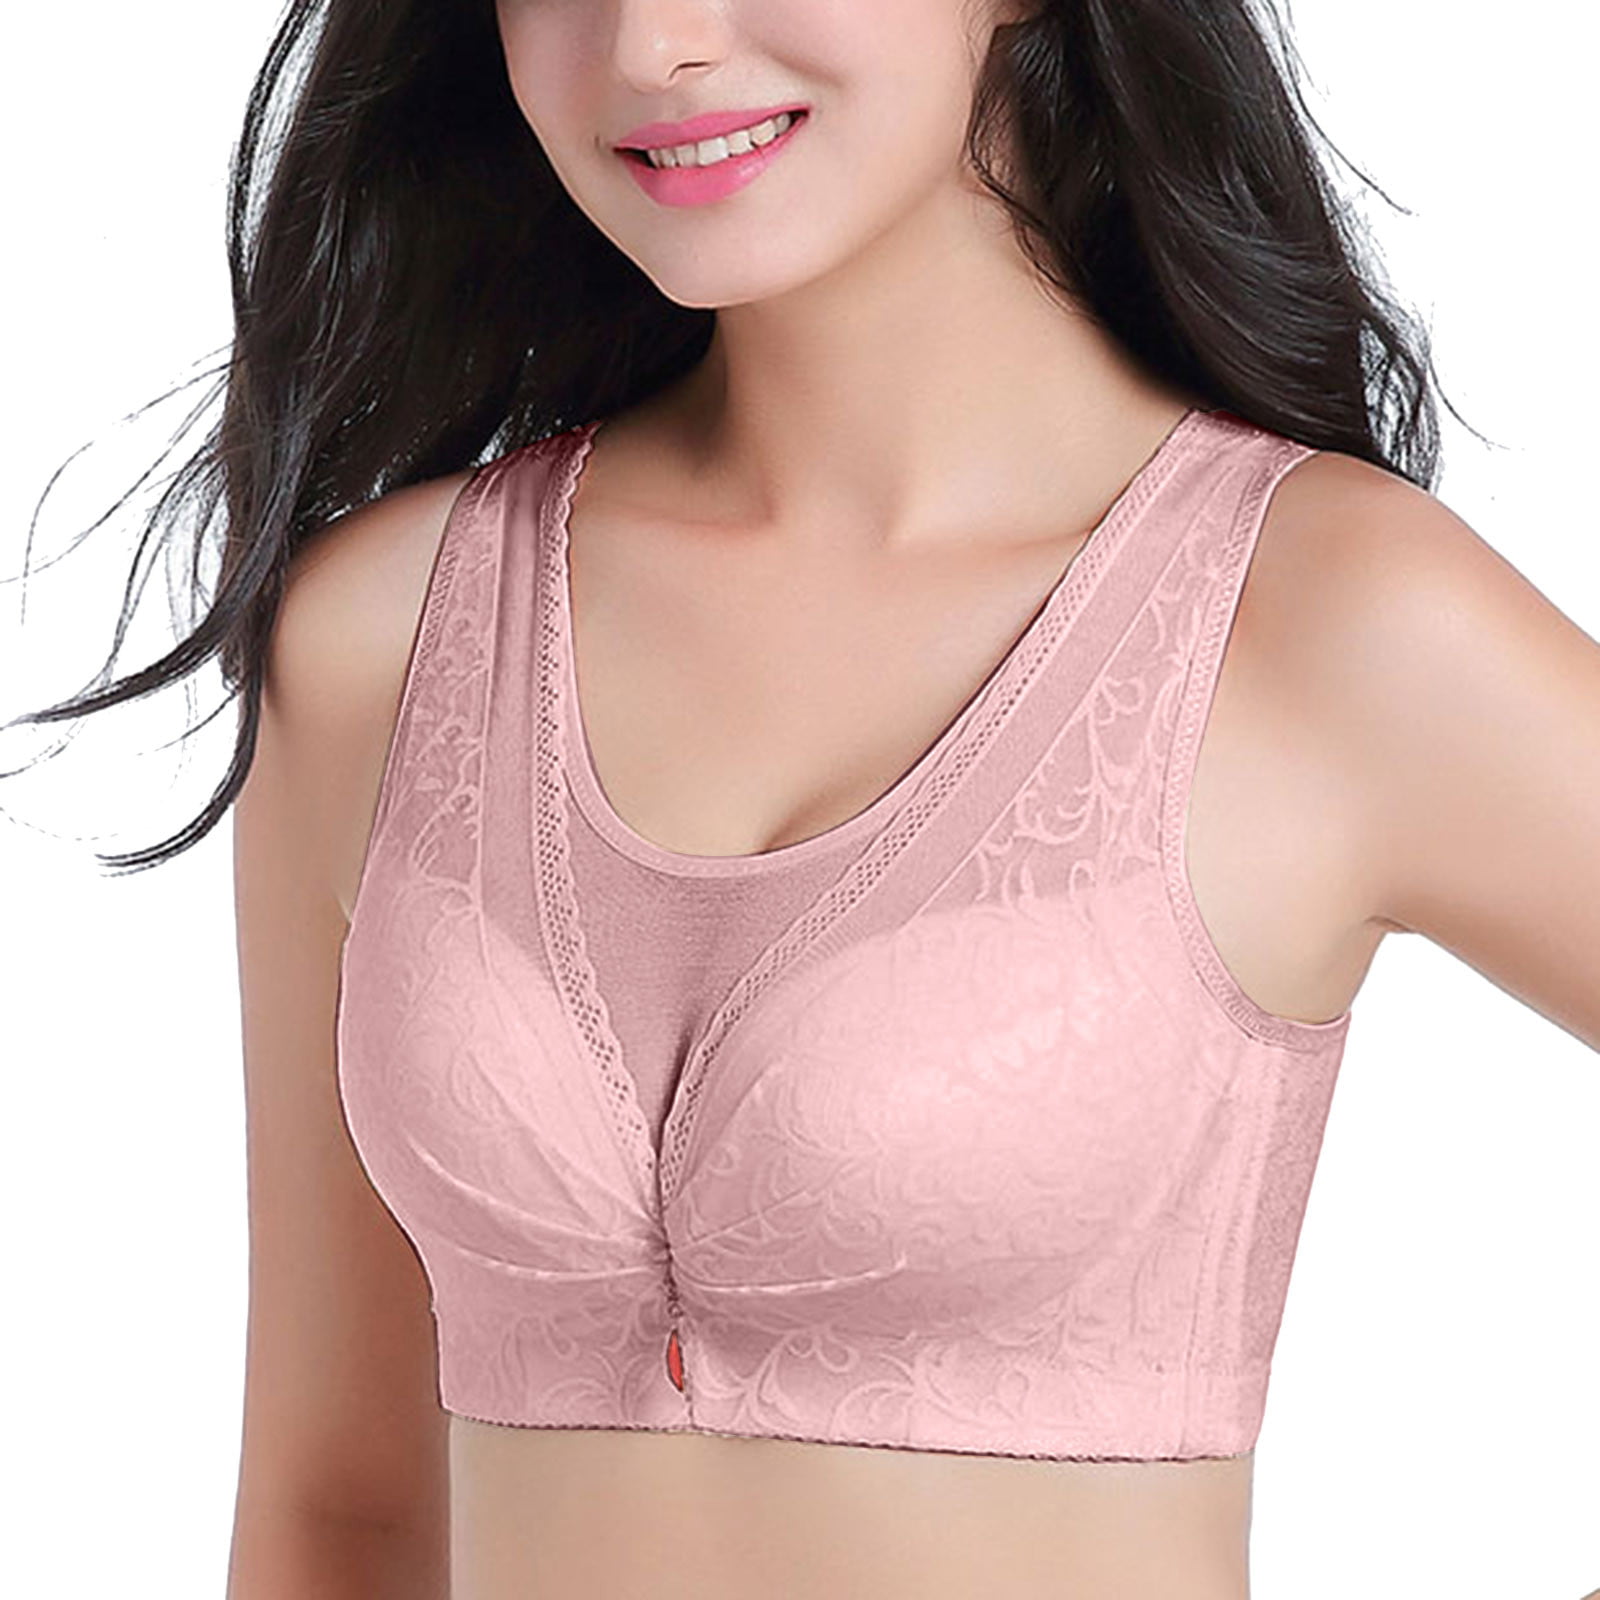 Buy Full Cup Thin Underwear Small Bra Plus Size Wireless Adjustable lace  Women's Bra Breast Cover B C D Cup Large Size Lace Bras Dark Beige Cup Size  D Bands Size 38